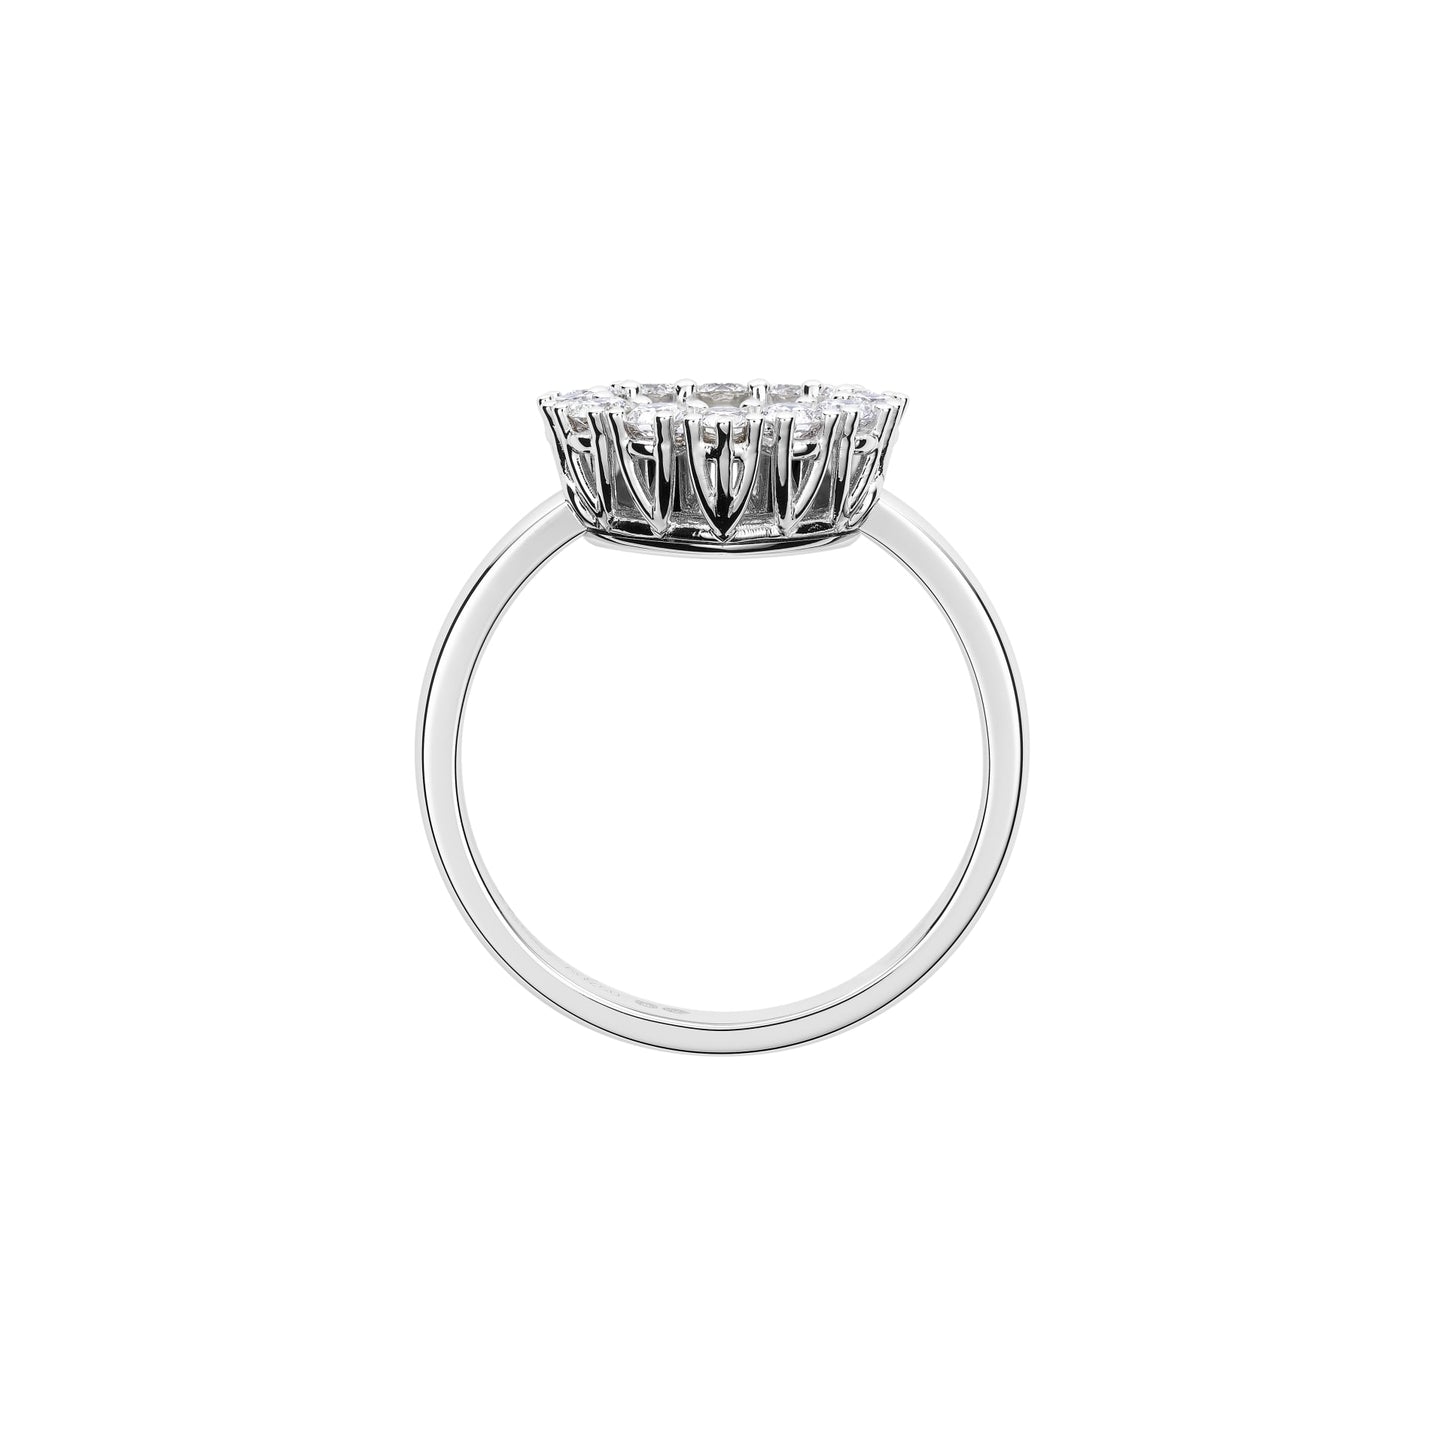 HAPPY DIAMONDS ICONS JOAILLERIE RING, ETHICAL WHITE GOLD, DIAMONDS 82A616-1000